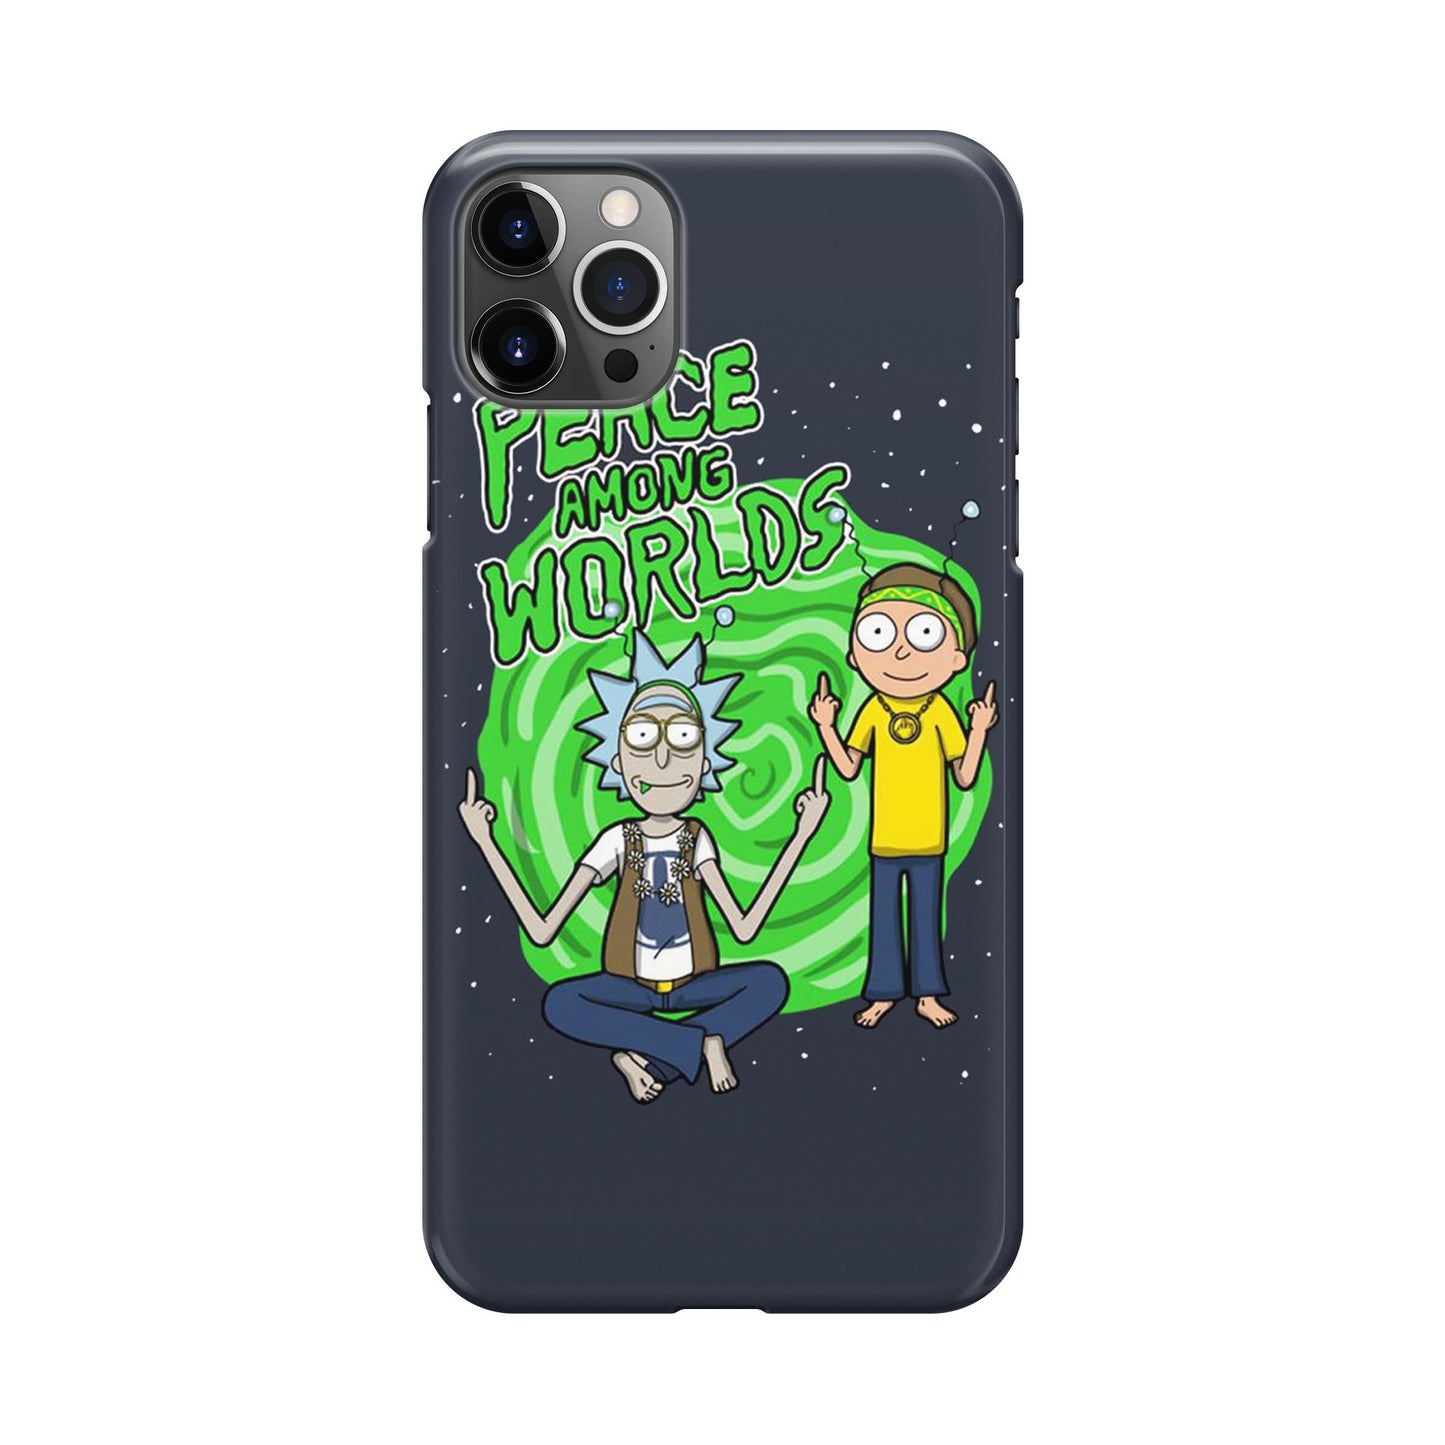 Rick And Morty Peace Among Worlds iPhone 12 Pro Max Case